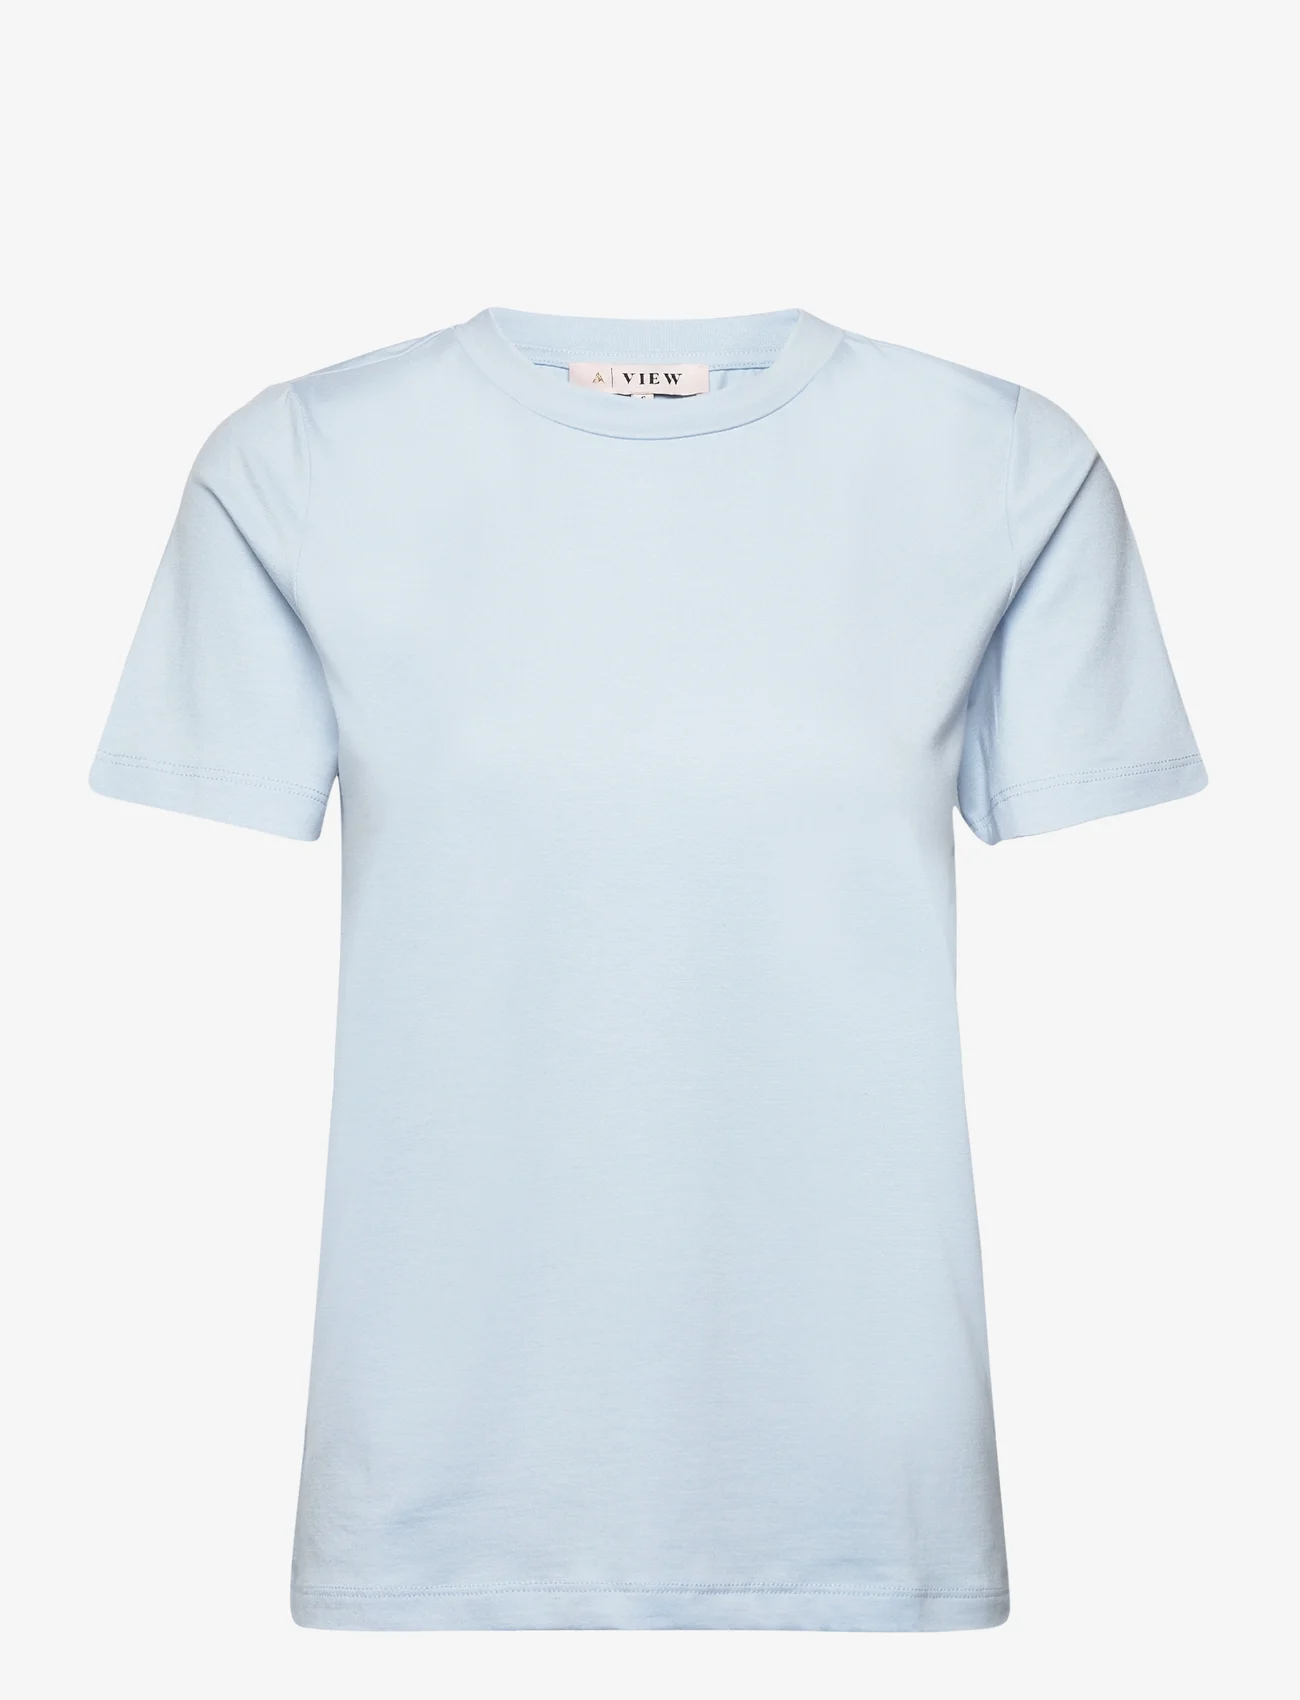 A-View - Stabil top s/s - t-shirts - light blue - 0